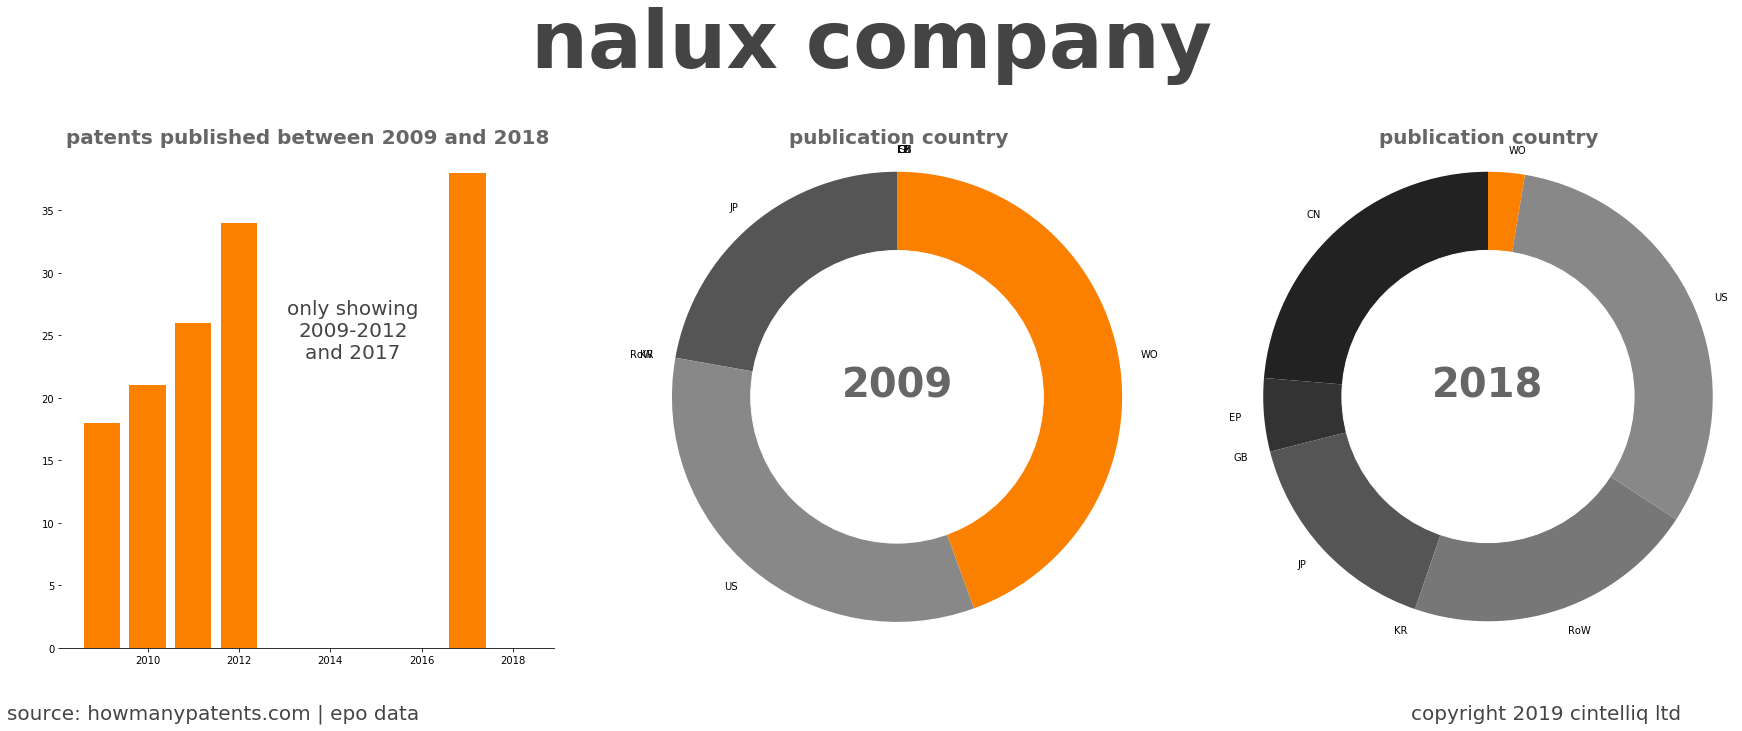 summary of patents for Nalux Company